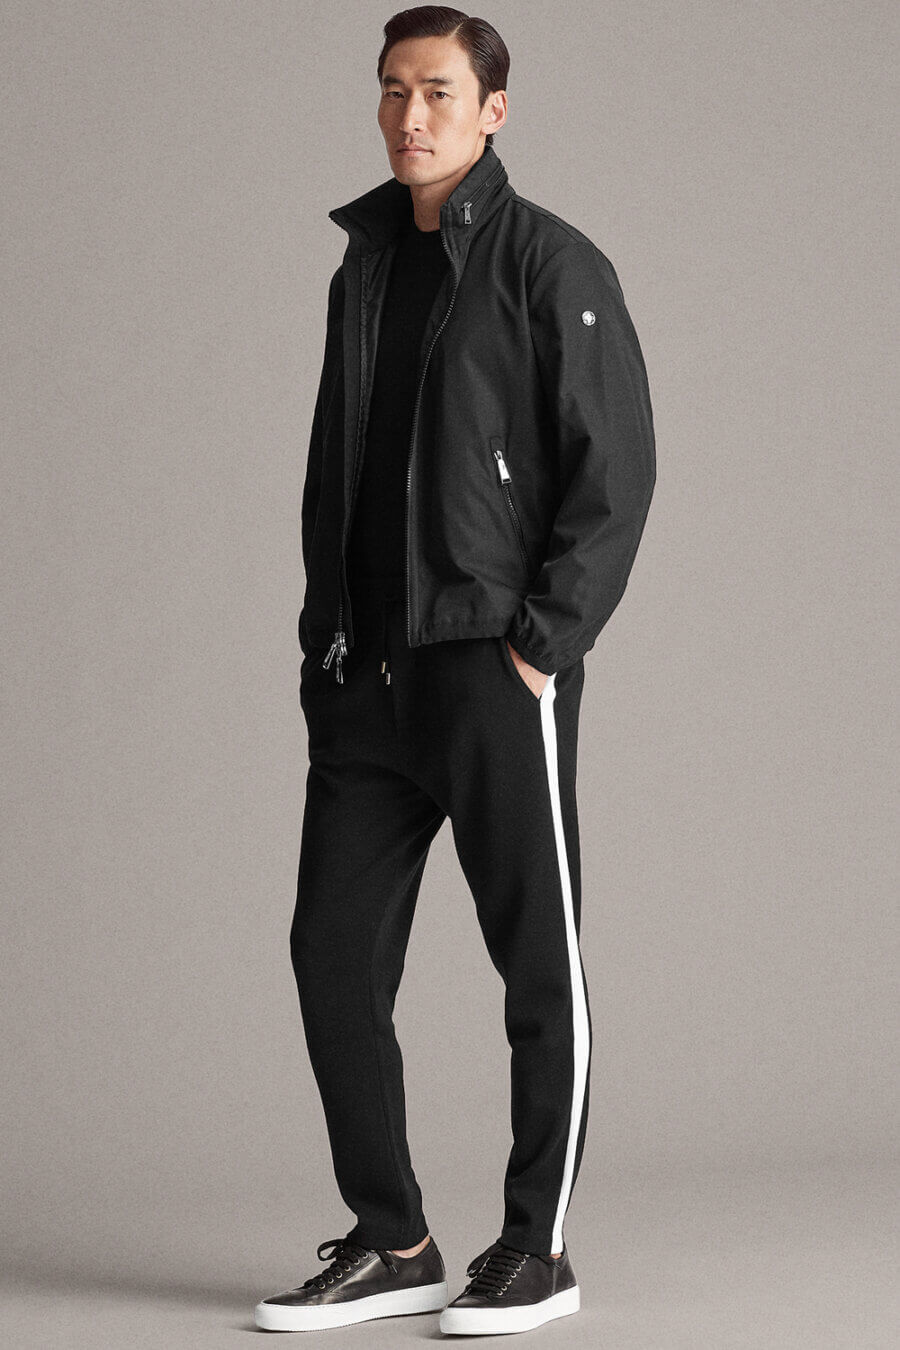 Men's all black sportswear outfit with track jacket, sweatpants and sneakers